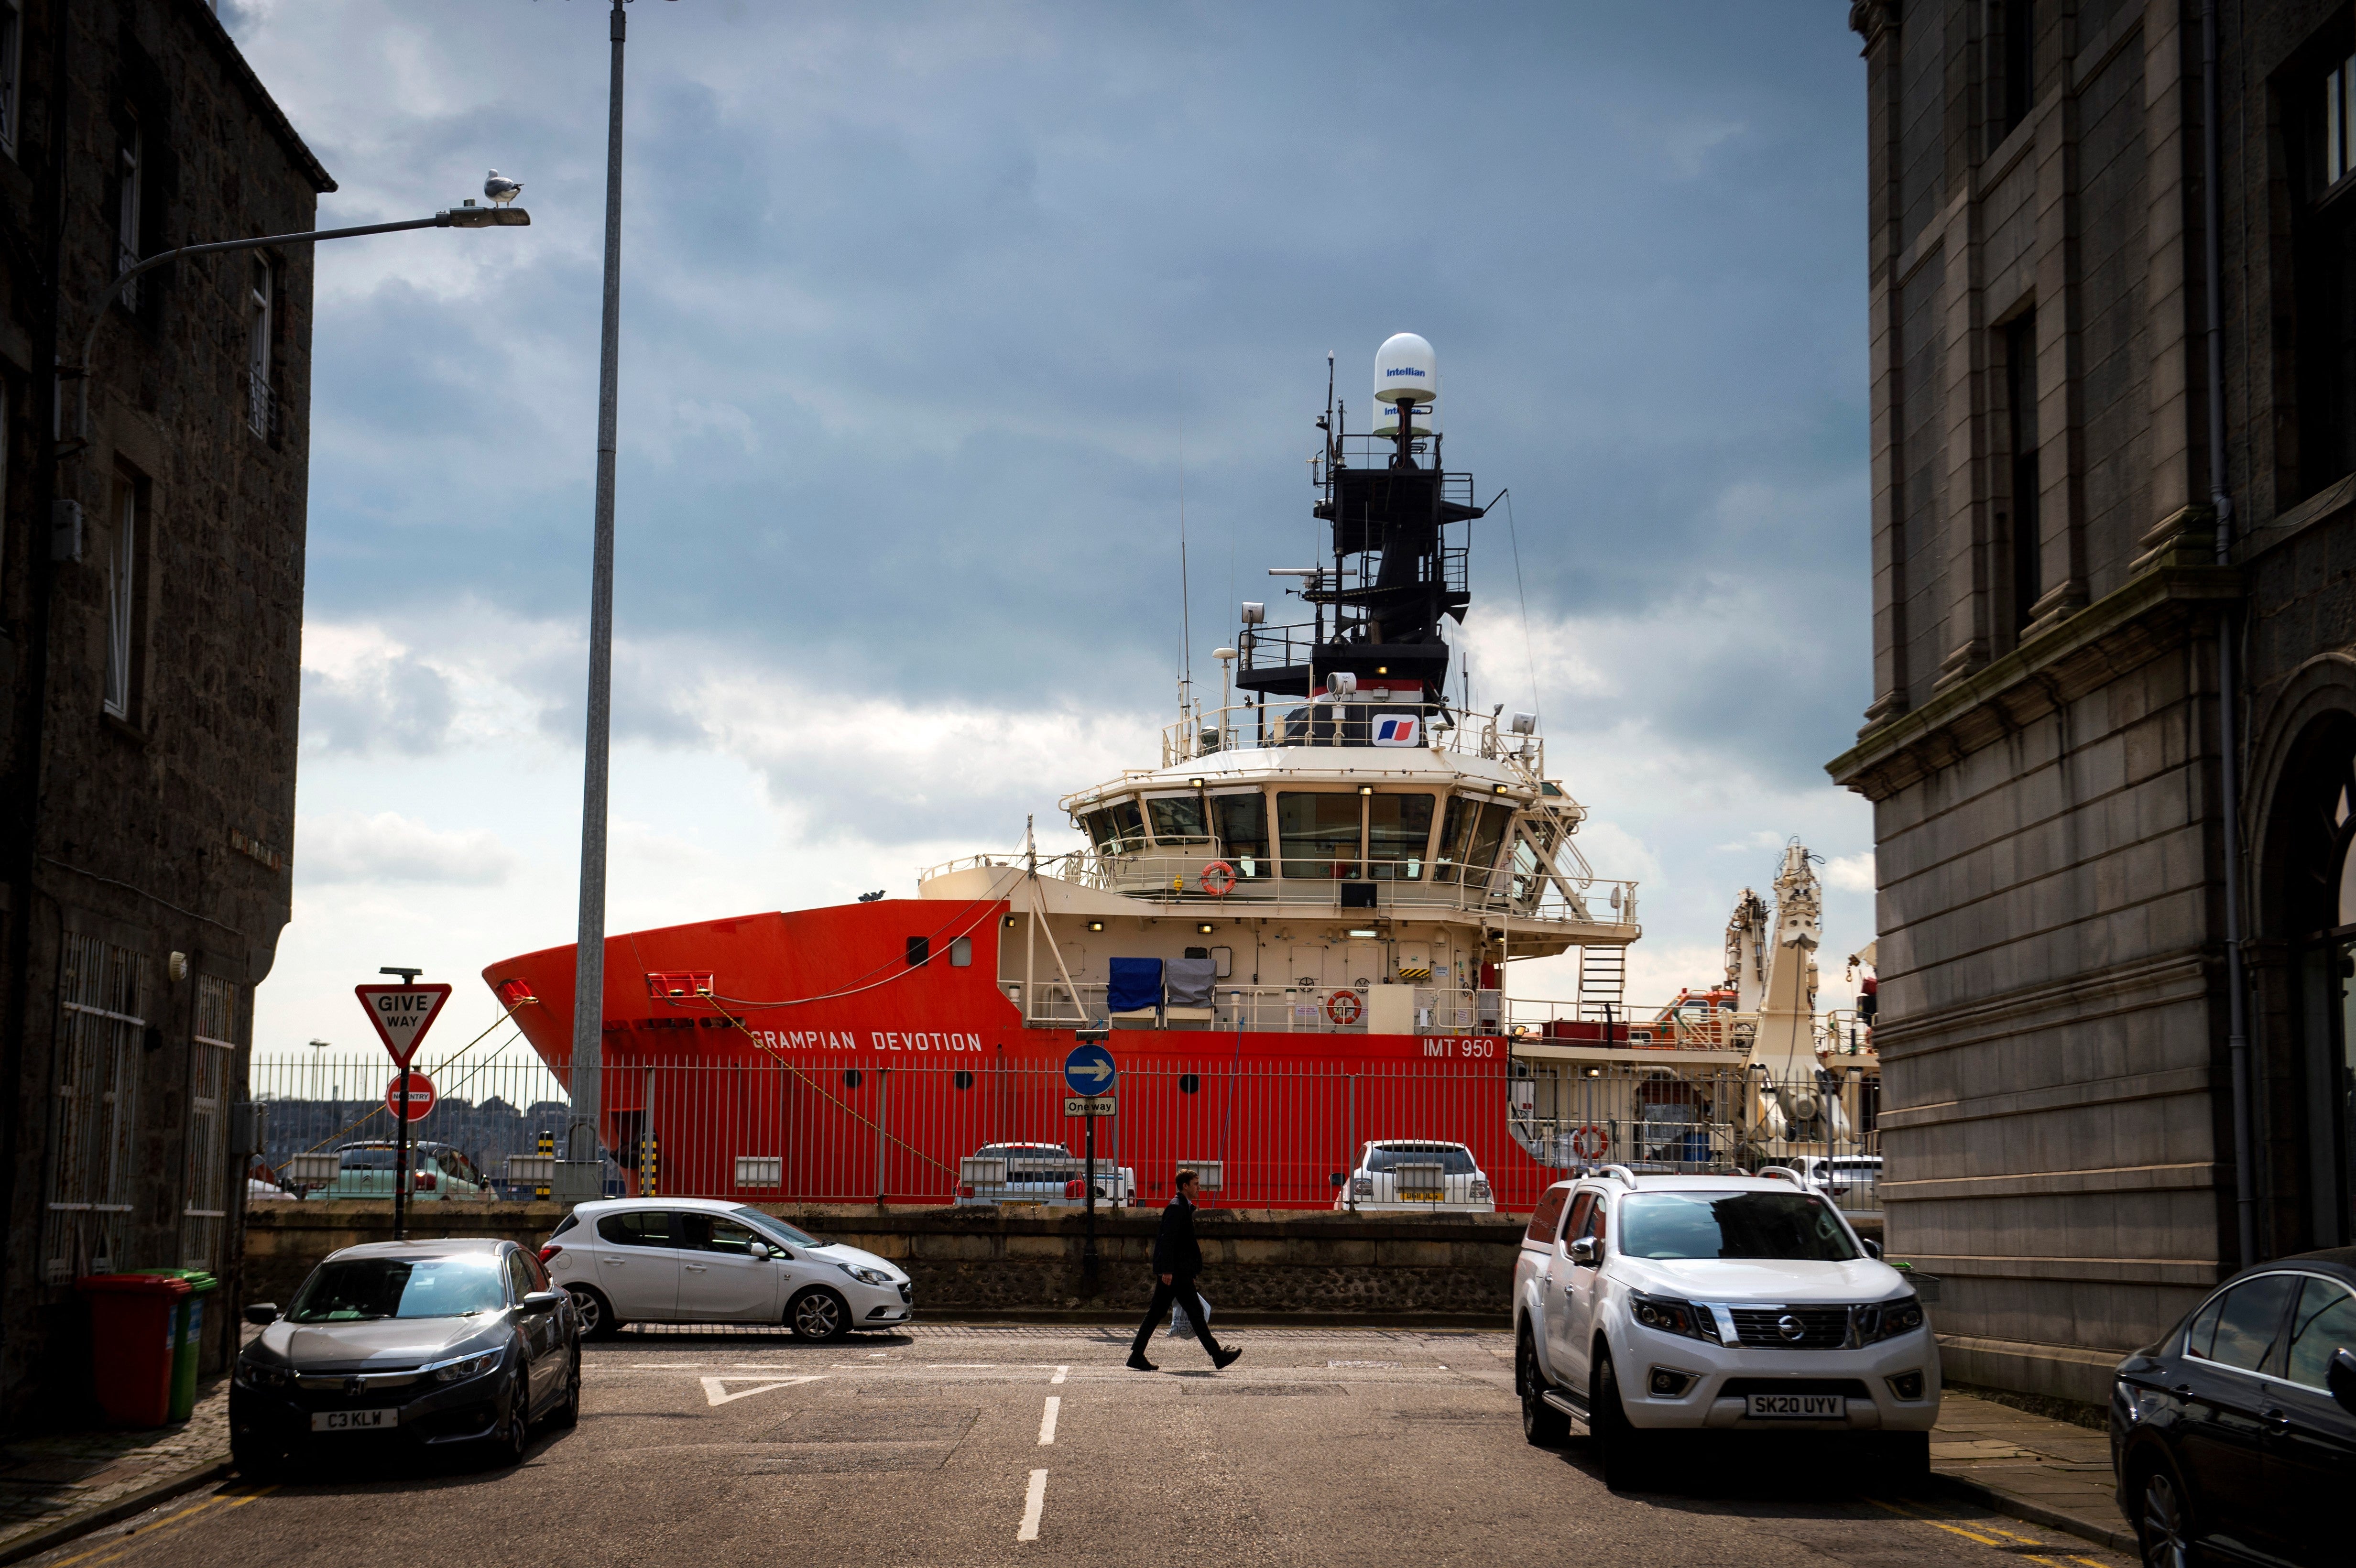 A photograph taken in April shows a supply vessel used in the oil, gas and renewable energy industry, docked at the Aberdeen Harbour, in Scotland.